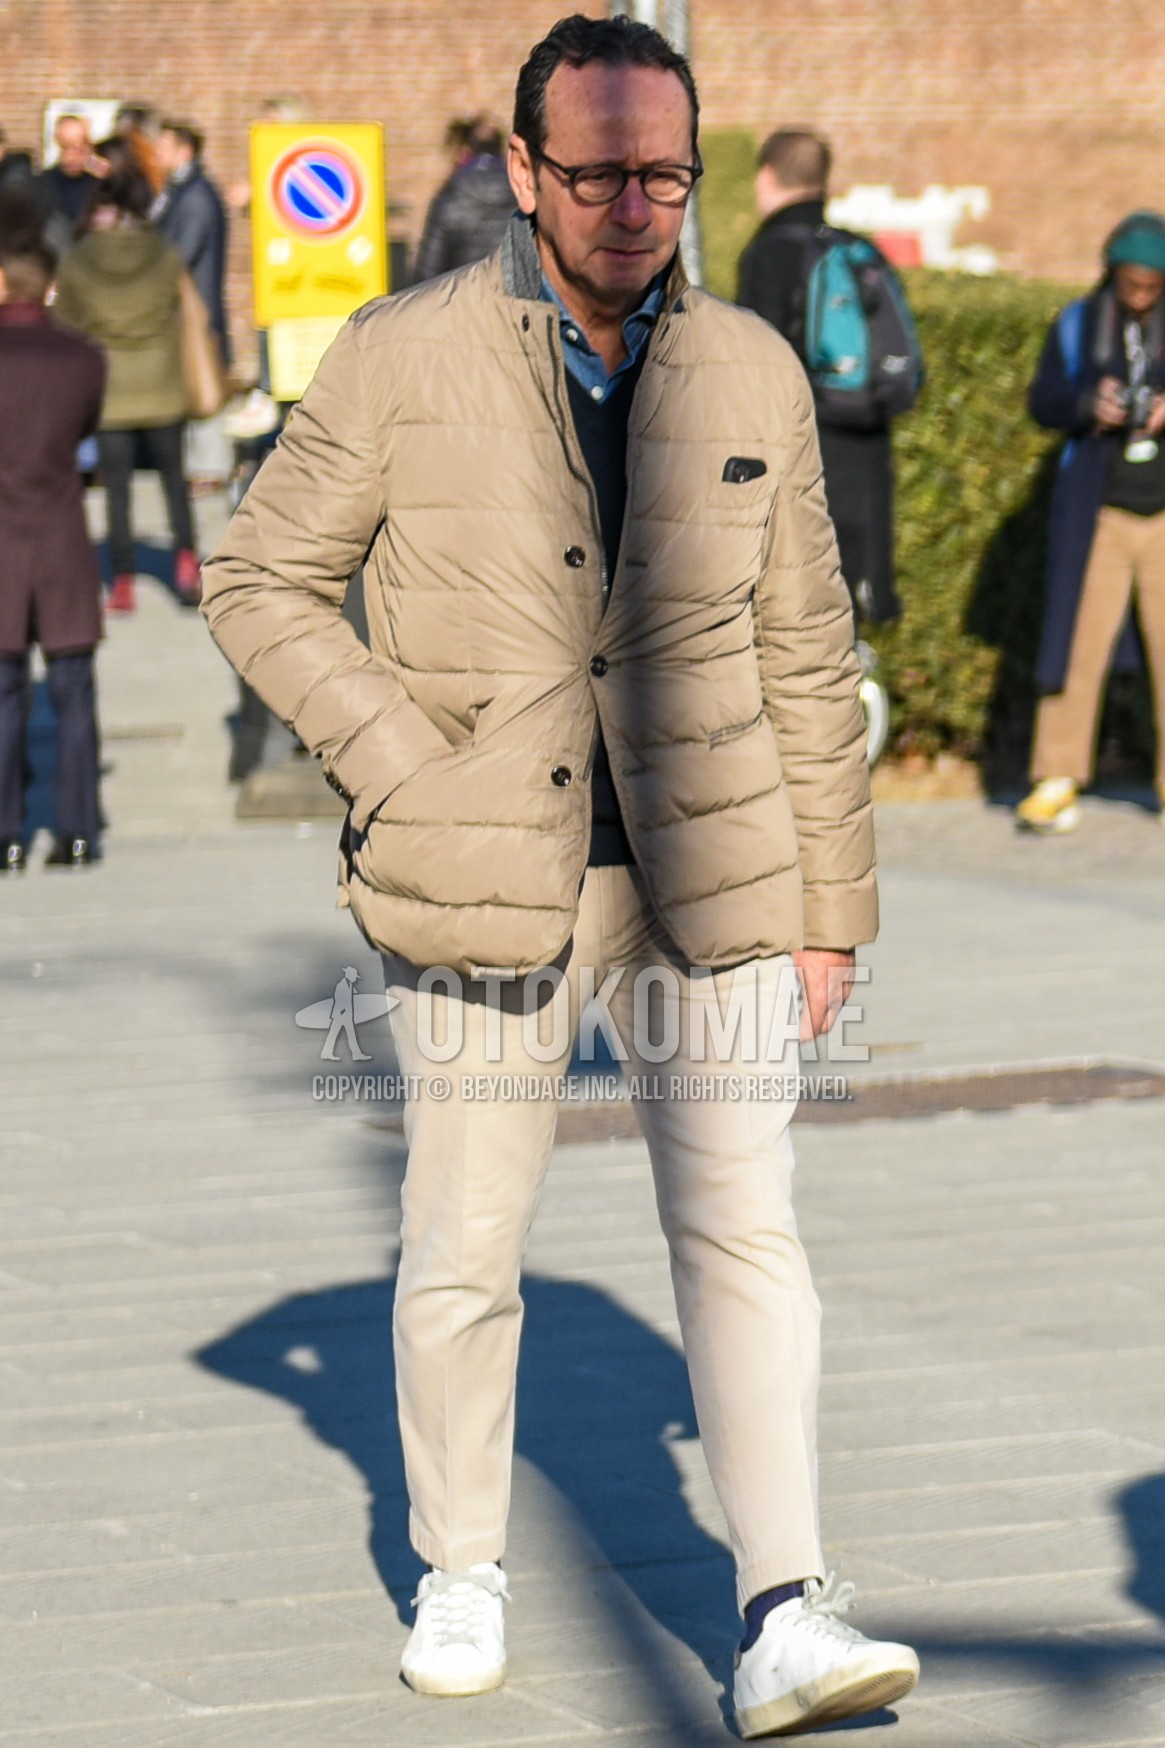 Men's autumn winter outfit with brown tortoiseshell glasses, beige plain tailored jacket, beige plain down jacket, black plain sweater, blue plain denim shirt/chambray shirt, beige plain chinos, beige plain ankle pants, gray plain socks, white low-cut sneakers.